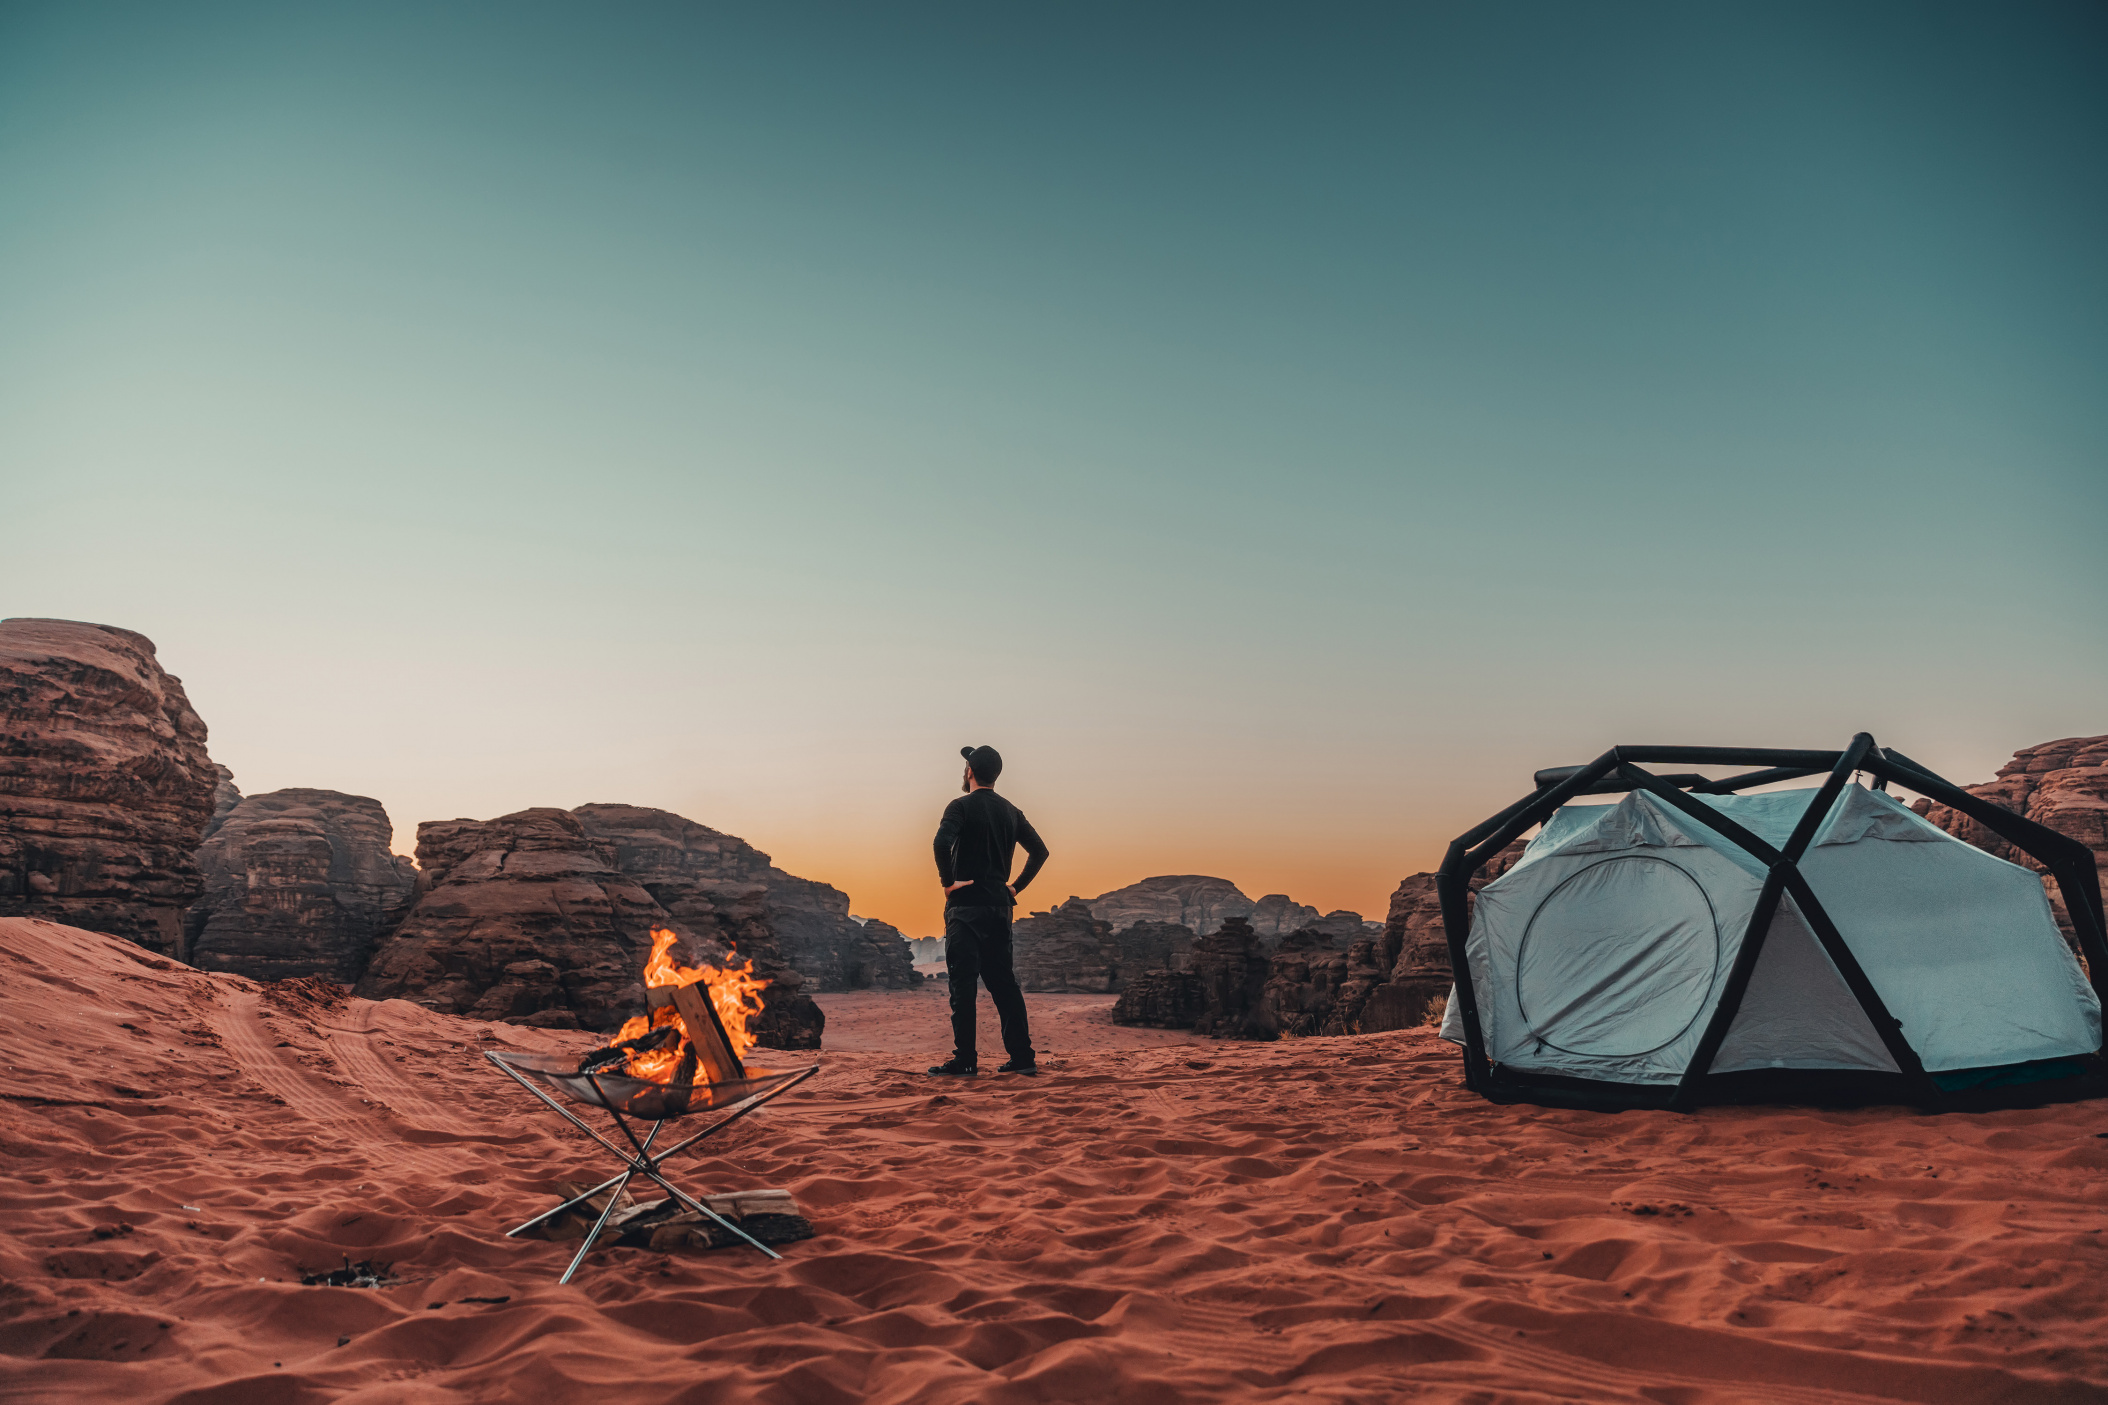 NEOM, SAUDI ARABIA – DECEMBER 10: Explorer with his camp fireplace set up by a tent overlooking Hisma Desert on December 10, 2022, in NEOM, Saudi Arabia.